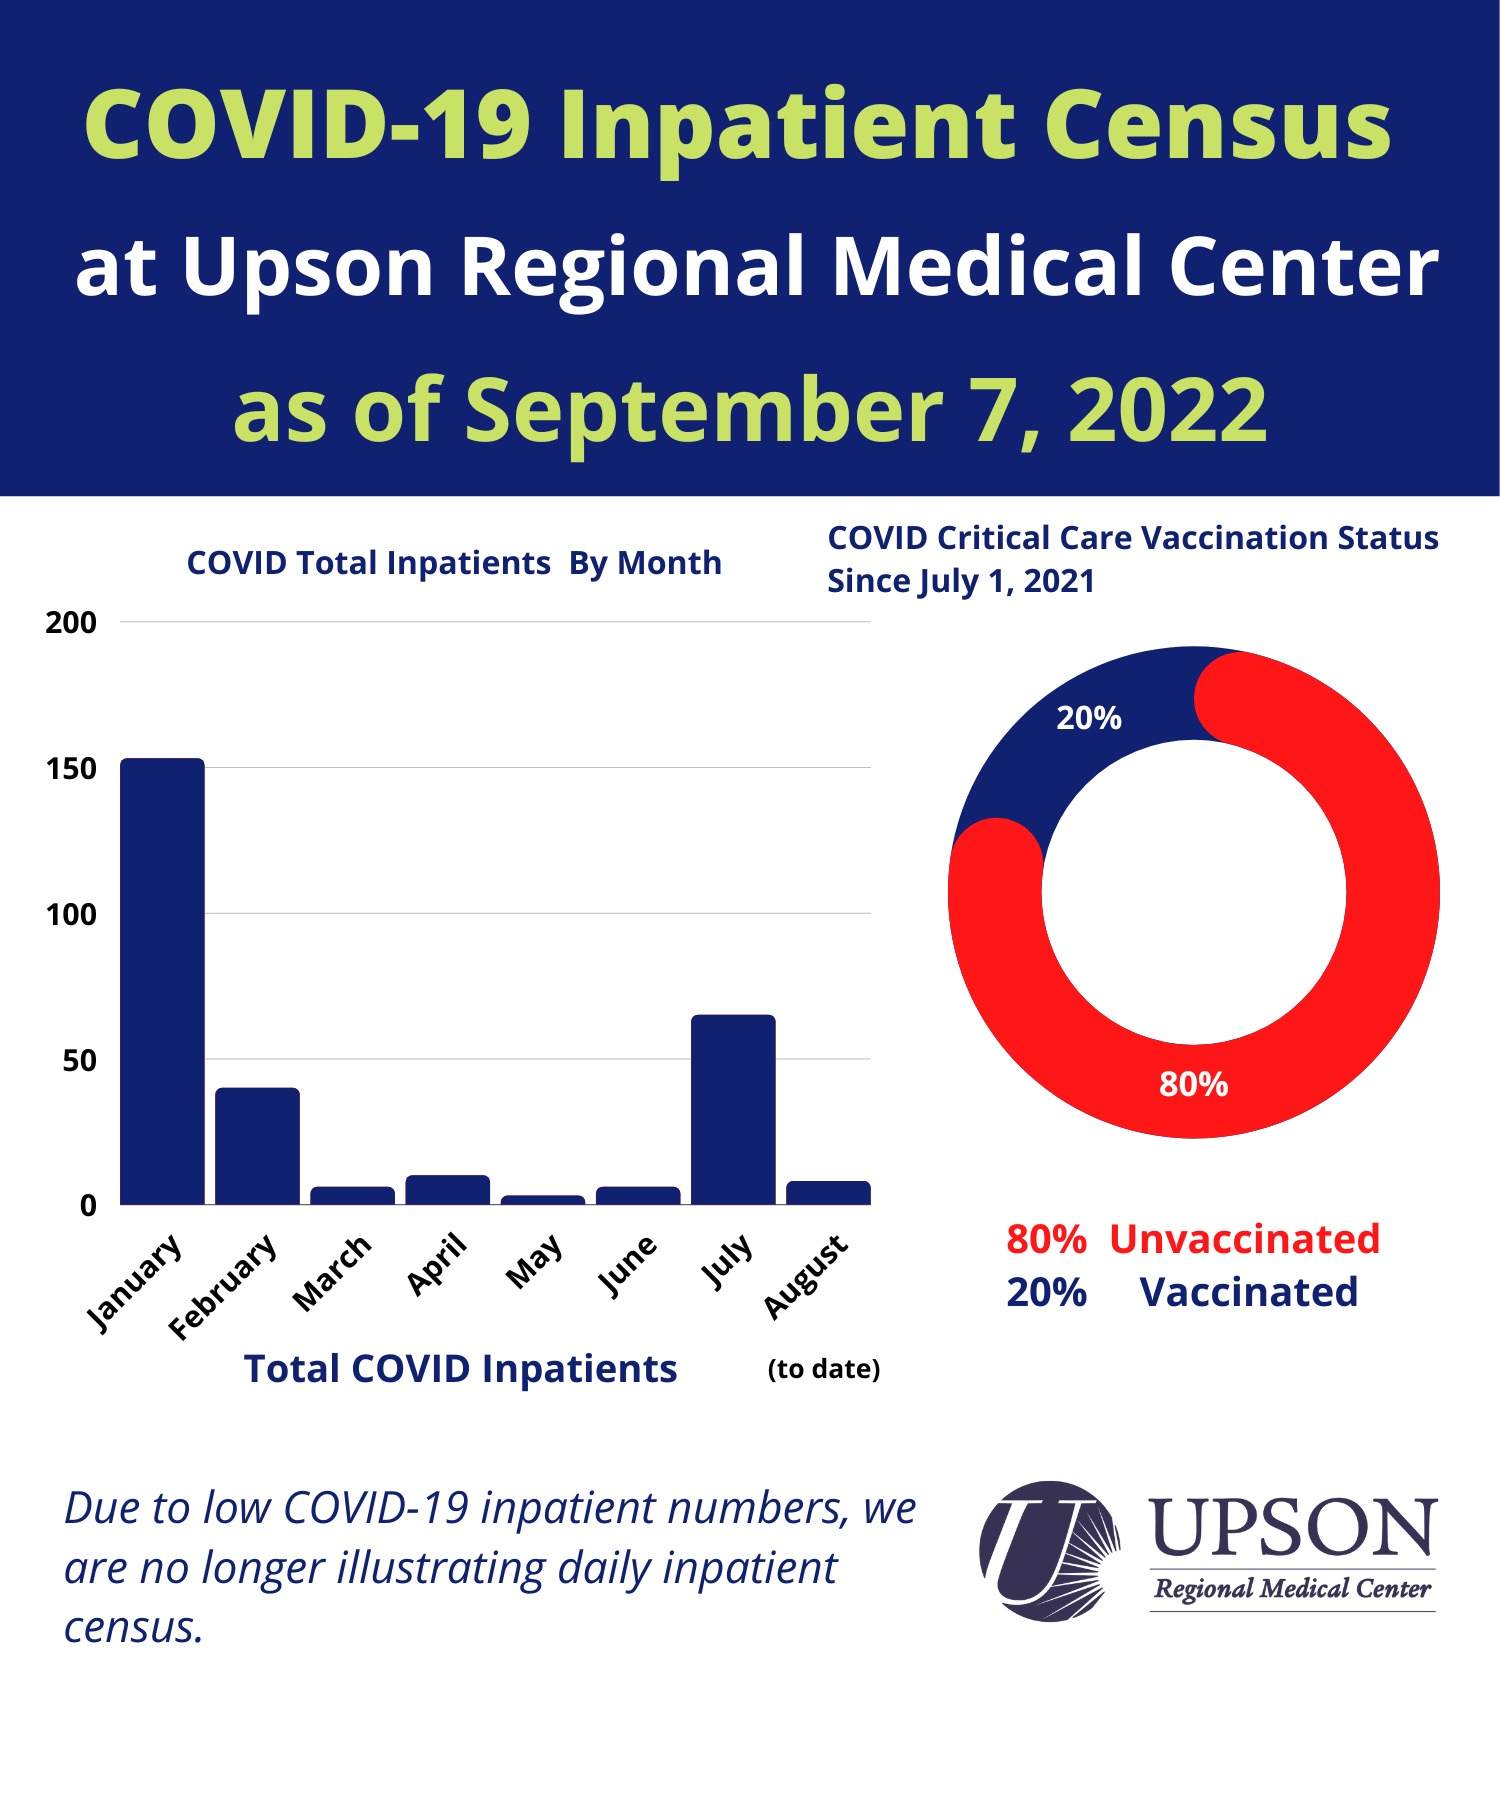 Photo for URMC COVID-19 Inpatient Status as of September 7, 2022